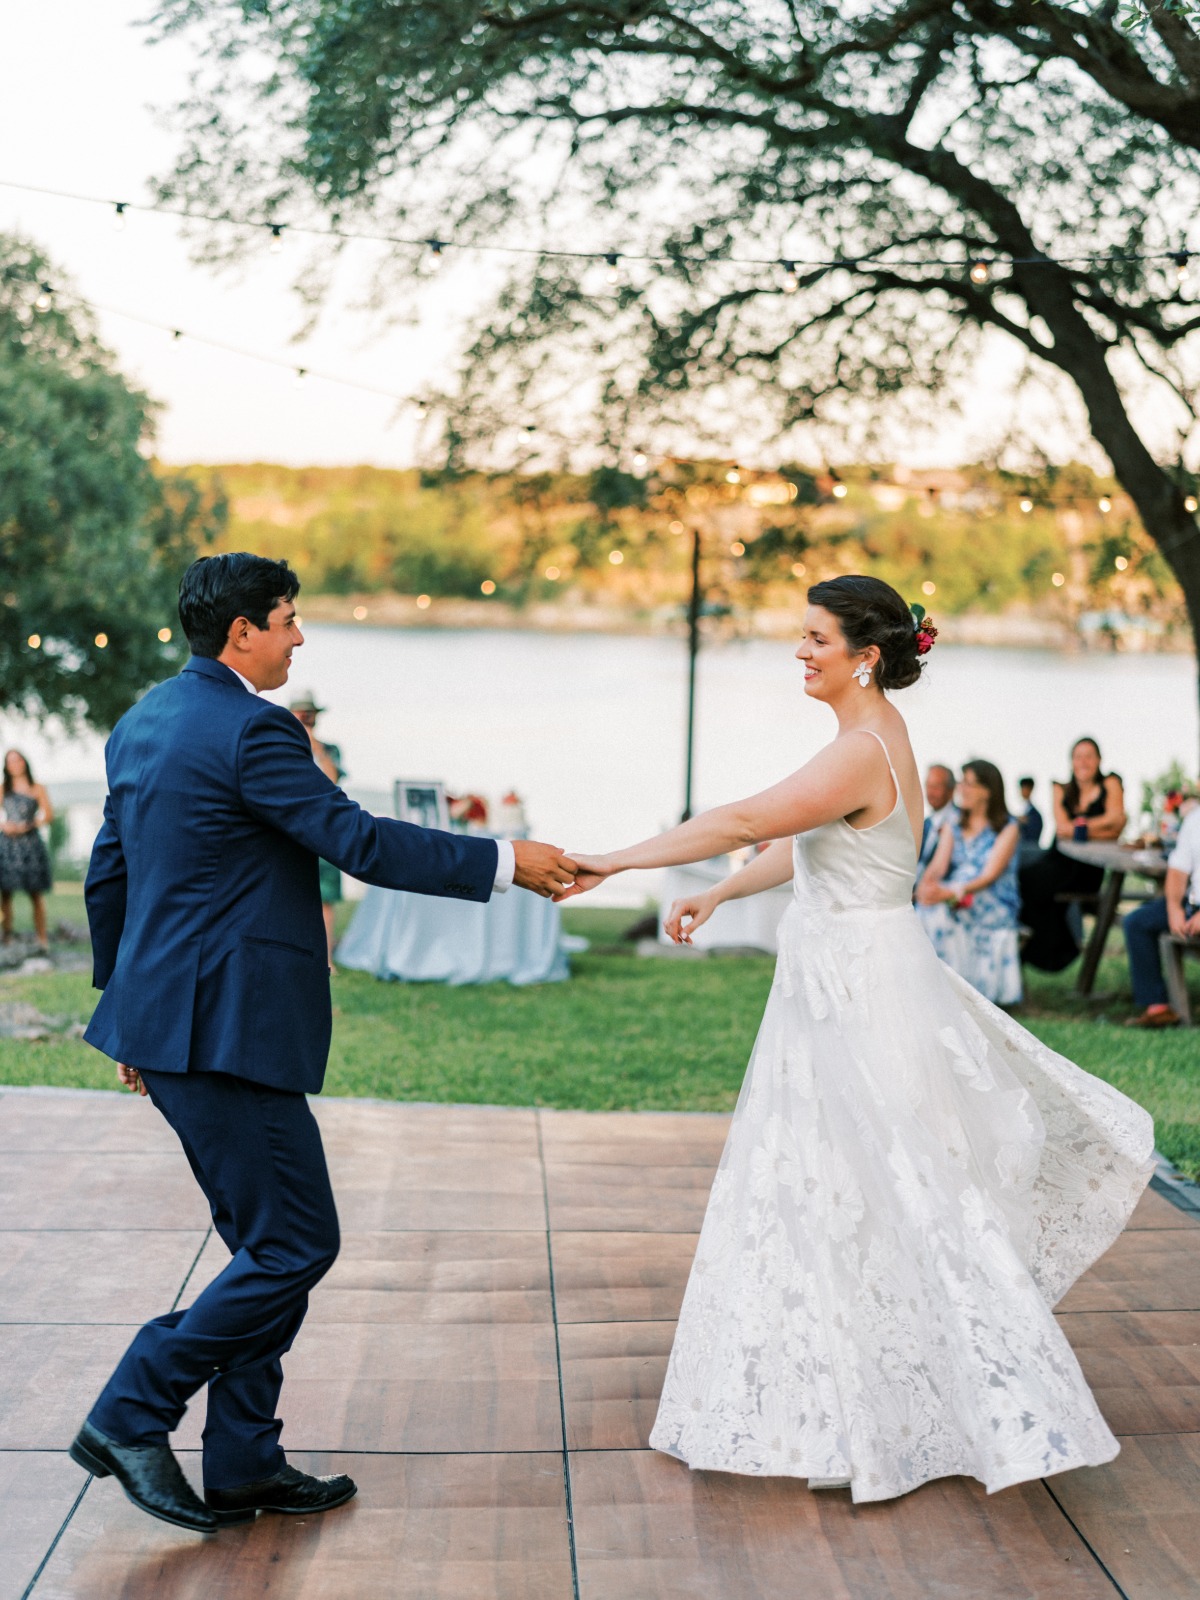 The Texas Couple Kept Their Wedding Date and Nailed Plan B